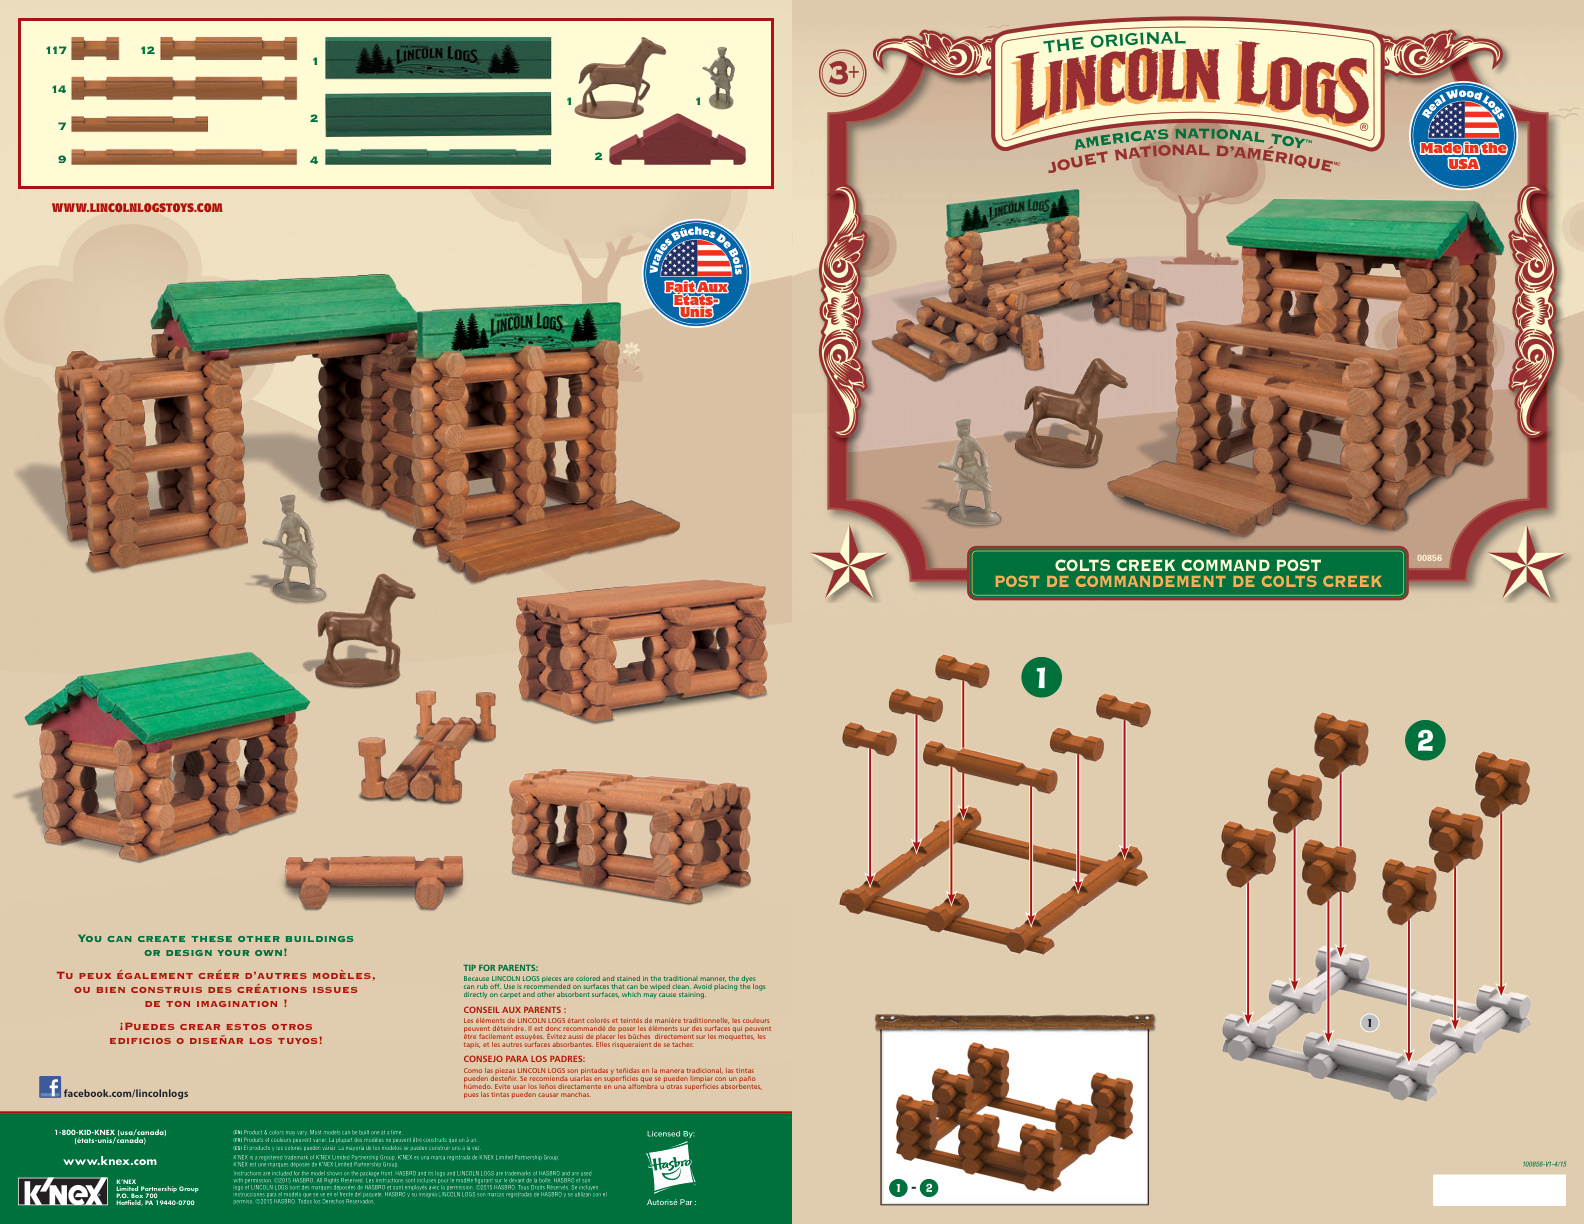 Lincoln Logs Colts Creek Command Post 00856